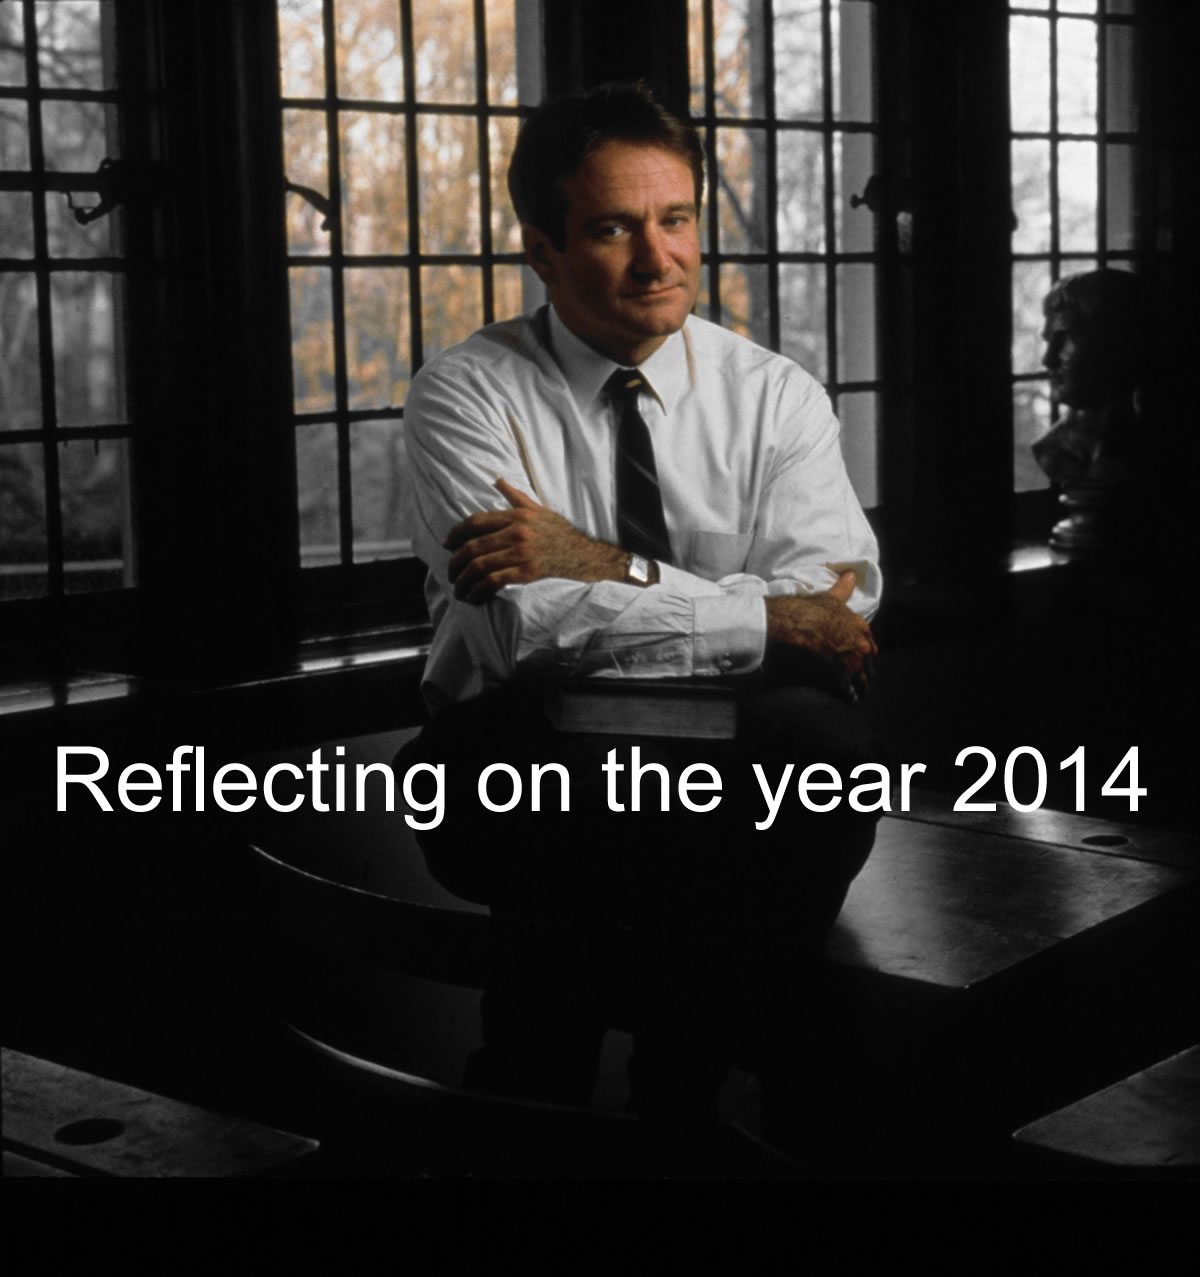 Reflecting on 2014 - Robin Williams in Dead Poets Society © Touchstone Pictures